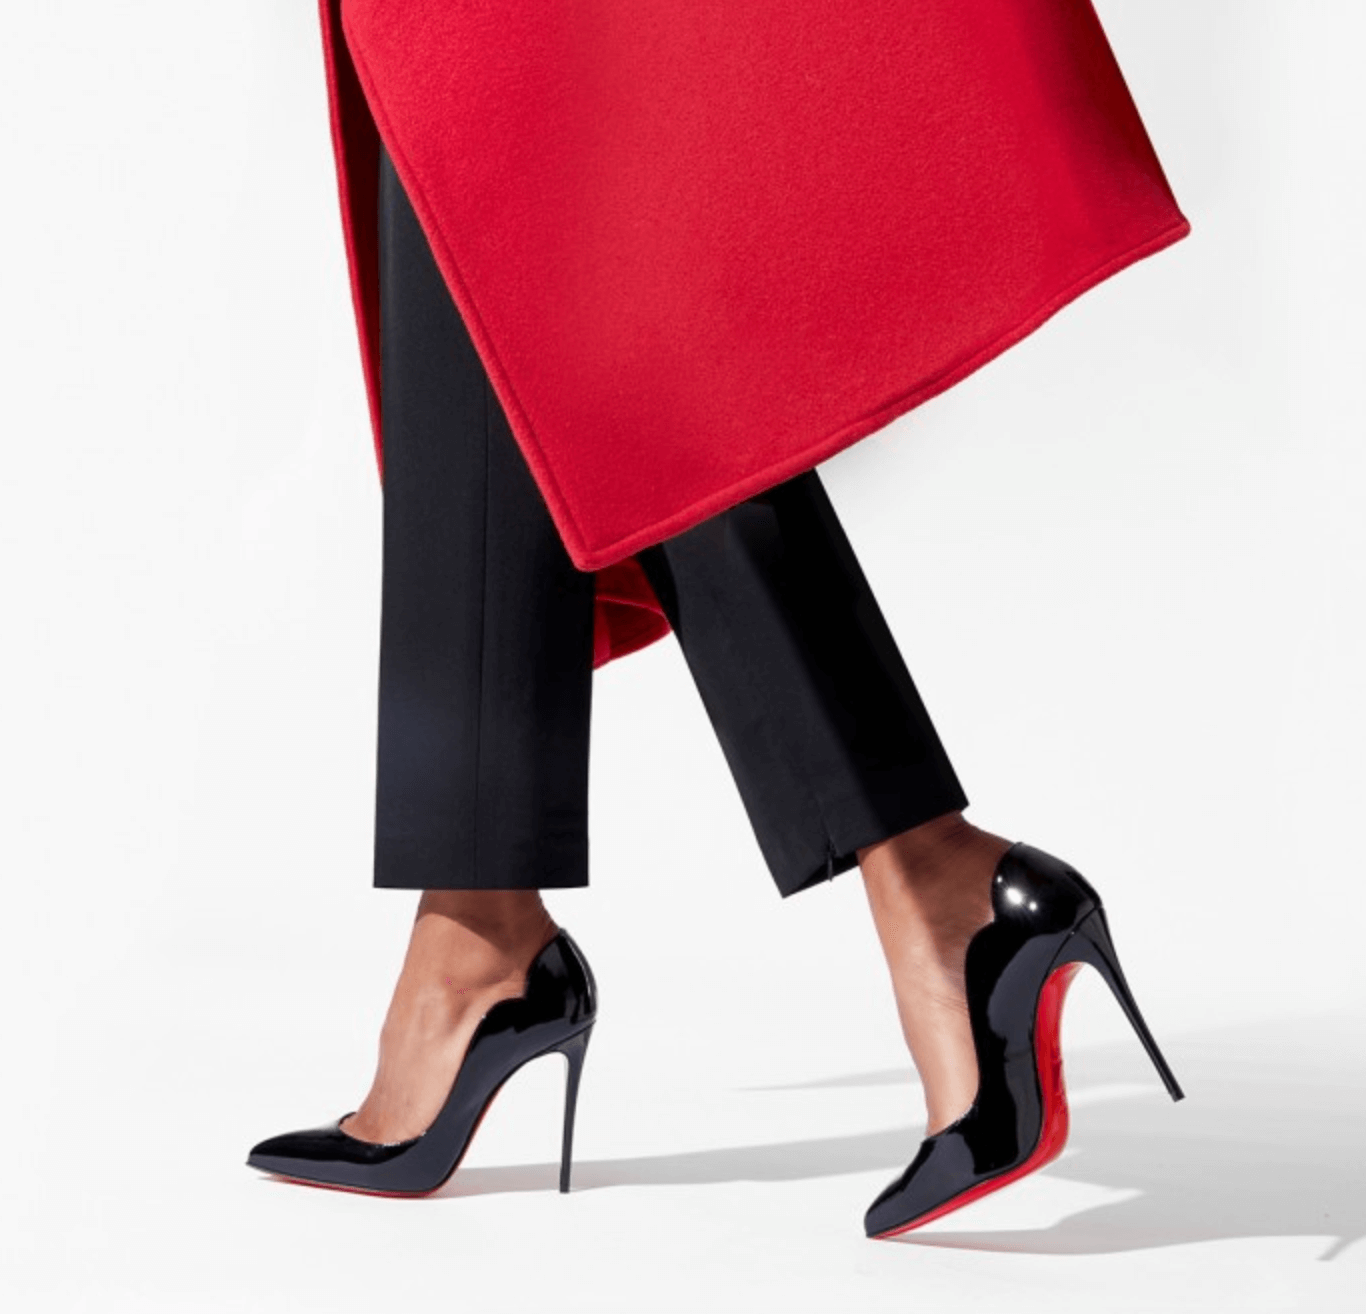 The "Hot Chick" high heels/Photo via Christian Louboutin’s official website